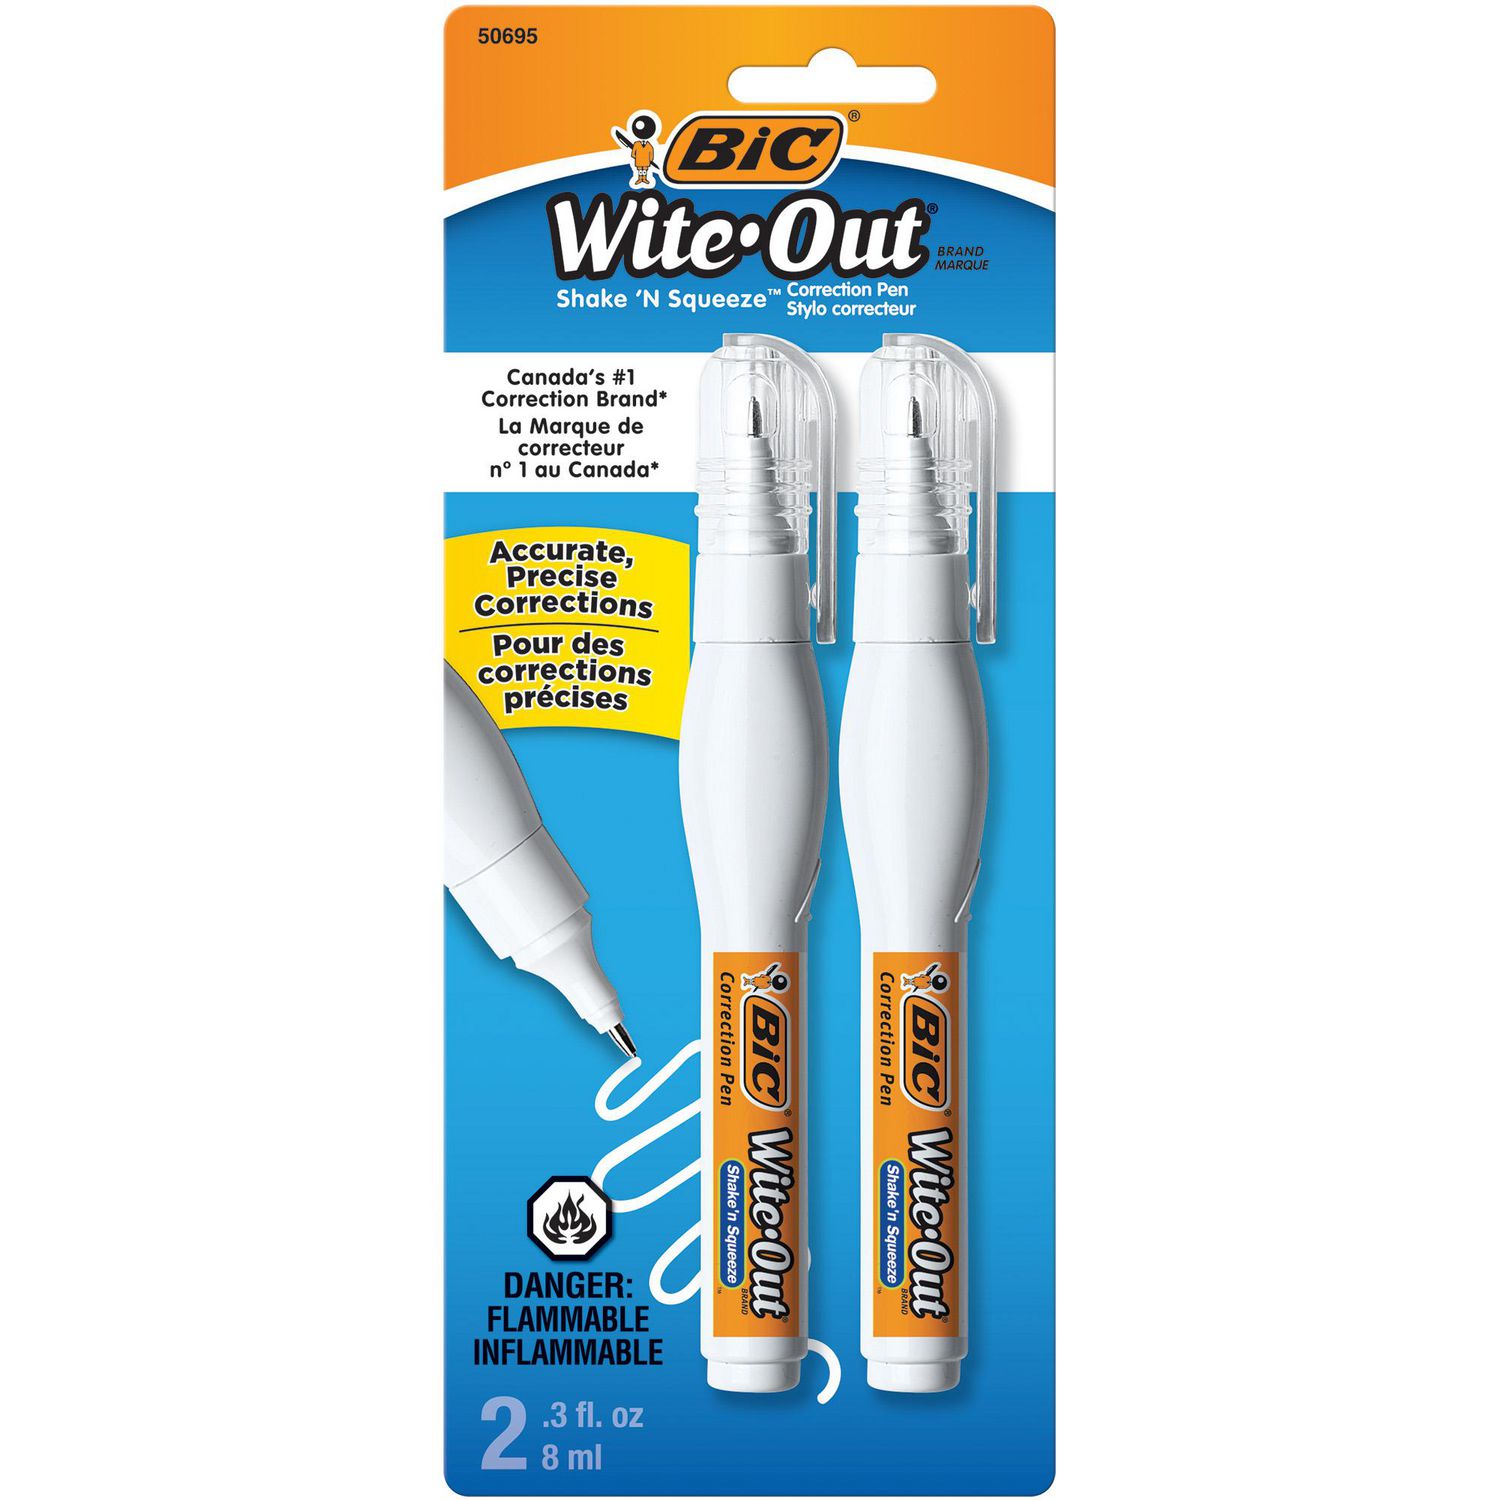 BIC Wite-Out Brand Shake 'n Squeeze Correction Pen, White, 2-Count, Fine  Point for Precise Corrections, Pack of 2